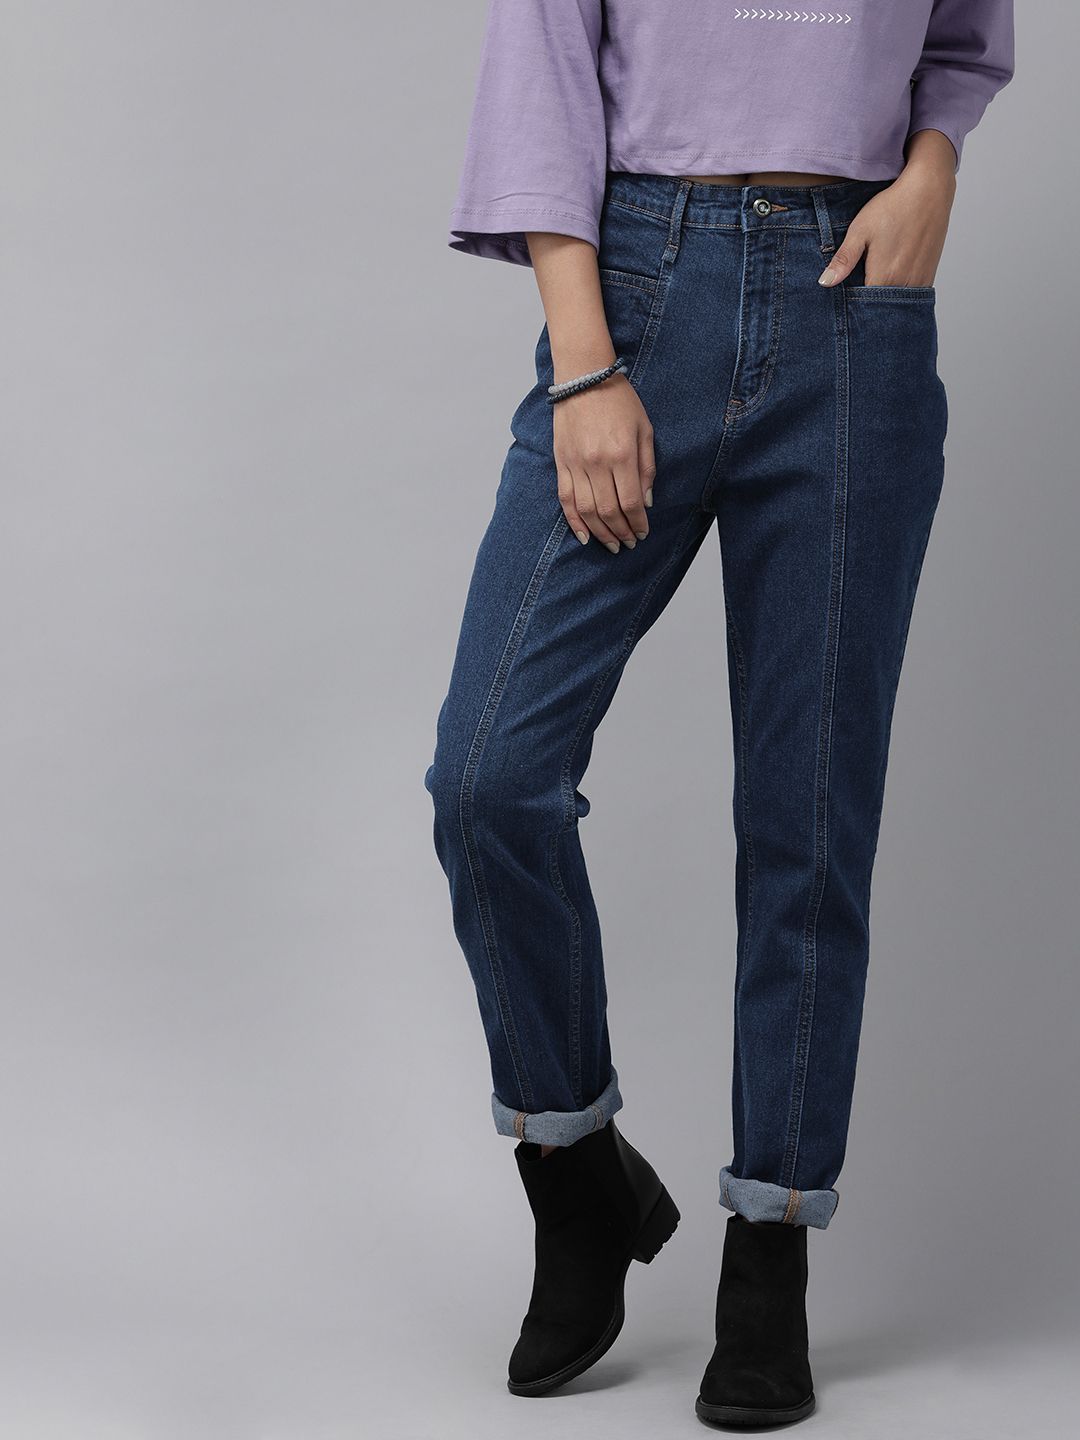 Roadster Women Blue Stretchable Jeans Price in India